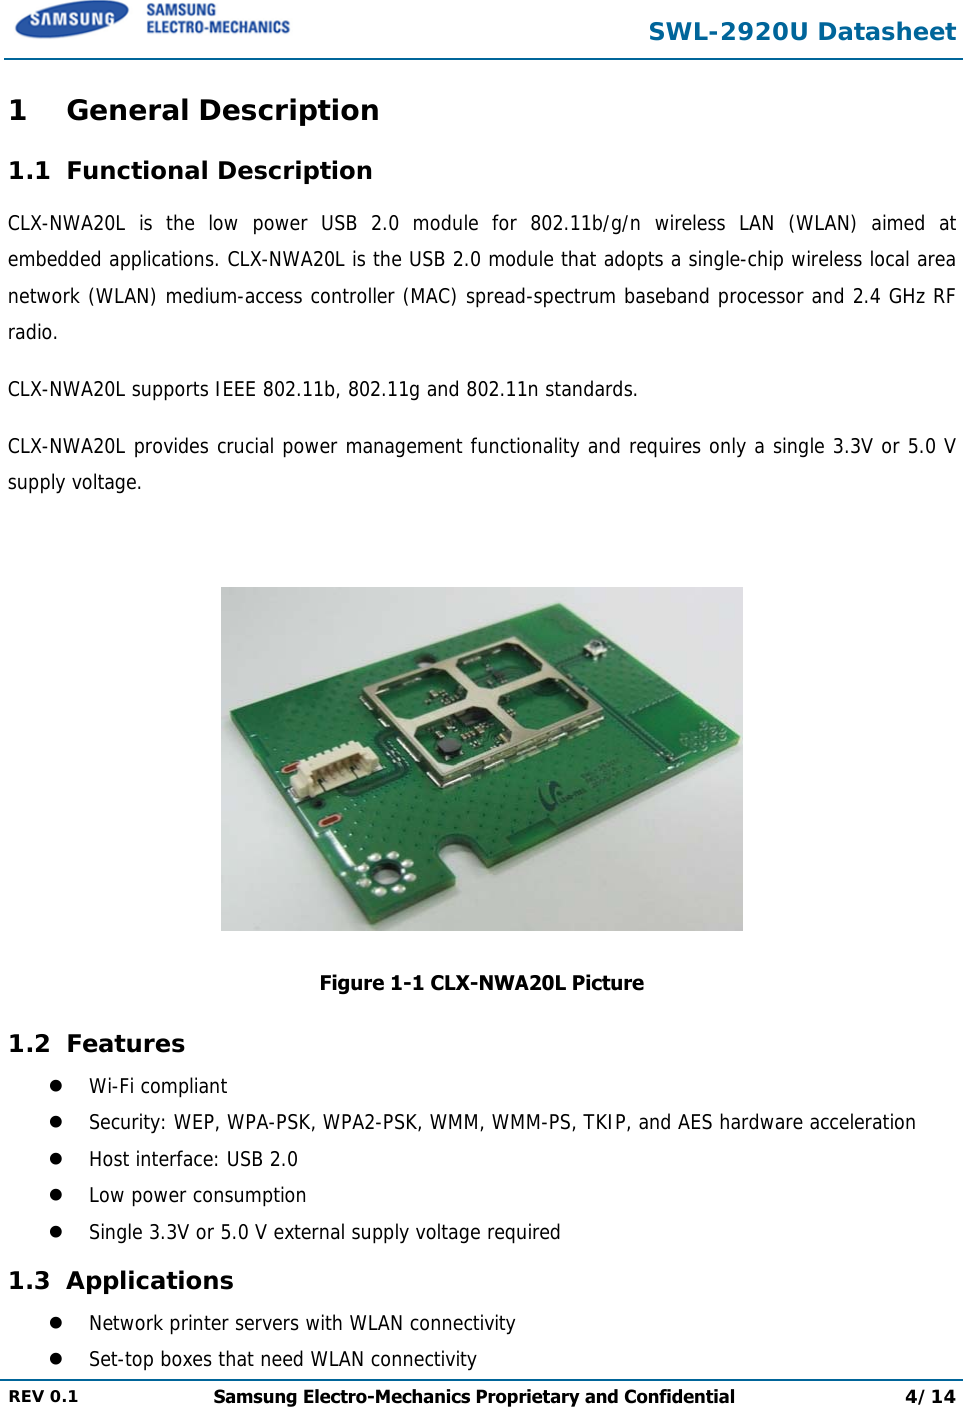  SWL-2920U Datasheet  REV 0.1  Samsung Electro-Mechanics Proprietary and Confidential 4/14  1 General Description 1.1 Functional Description CLX-NWA20L is the low power USB 2.0 module for 802.11b/g/n wireless LAN (WLAN) aimed at embedded applications. CLX-NWA20L is the USB 2.0 module that adopts a single-chip wireless local area network (WLAN) medium-access controller (MAC) spread-spectrum baseband processor and 2.4 GHz RF radio. CLX-NWA20L supports IEEE 802.11b, 802.11g and 802.11n standards. CLX-NWA20L provides crucial power management functionality and requires only a single 3.3V or 5.0 V supply voltage.   Figure 1-1 CLX-NWA20L Picture 1.2 Features  Wi-Fi compliant  Security: WEP, WPA-PSK, WPA2-PSK, WMM, WMM-PS, TKIP, and AES hardware acceleration  Host interface: USB 2.0   Low power consumption  Single 3.3V or 5.0 V external supply voltage required 1.3 Applications  Network printer servers with WLAN connectivity  Set-top boxes that need WLAN connectivity 